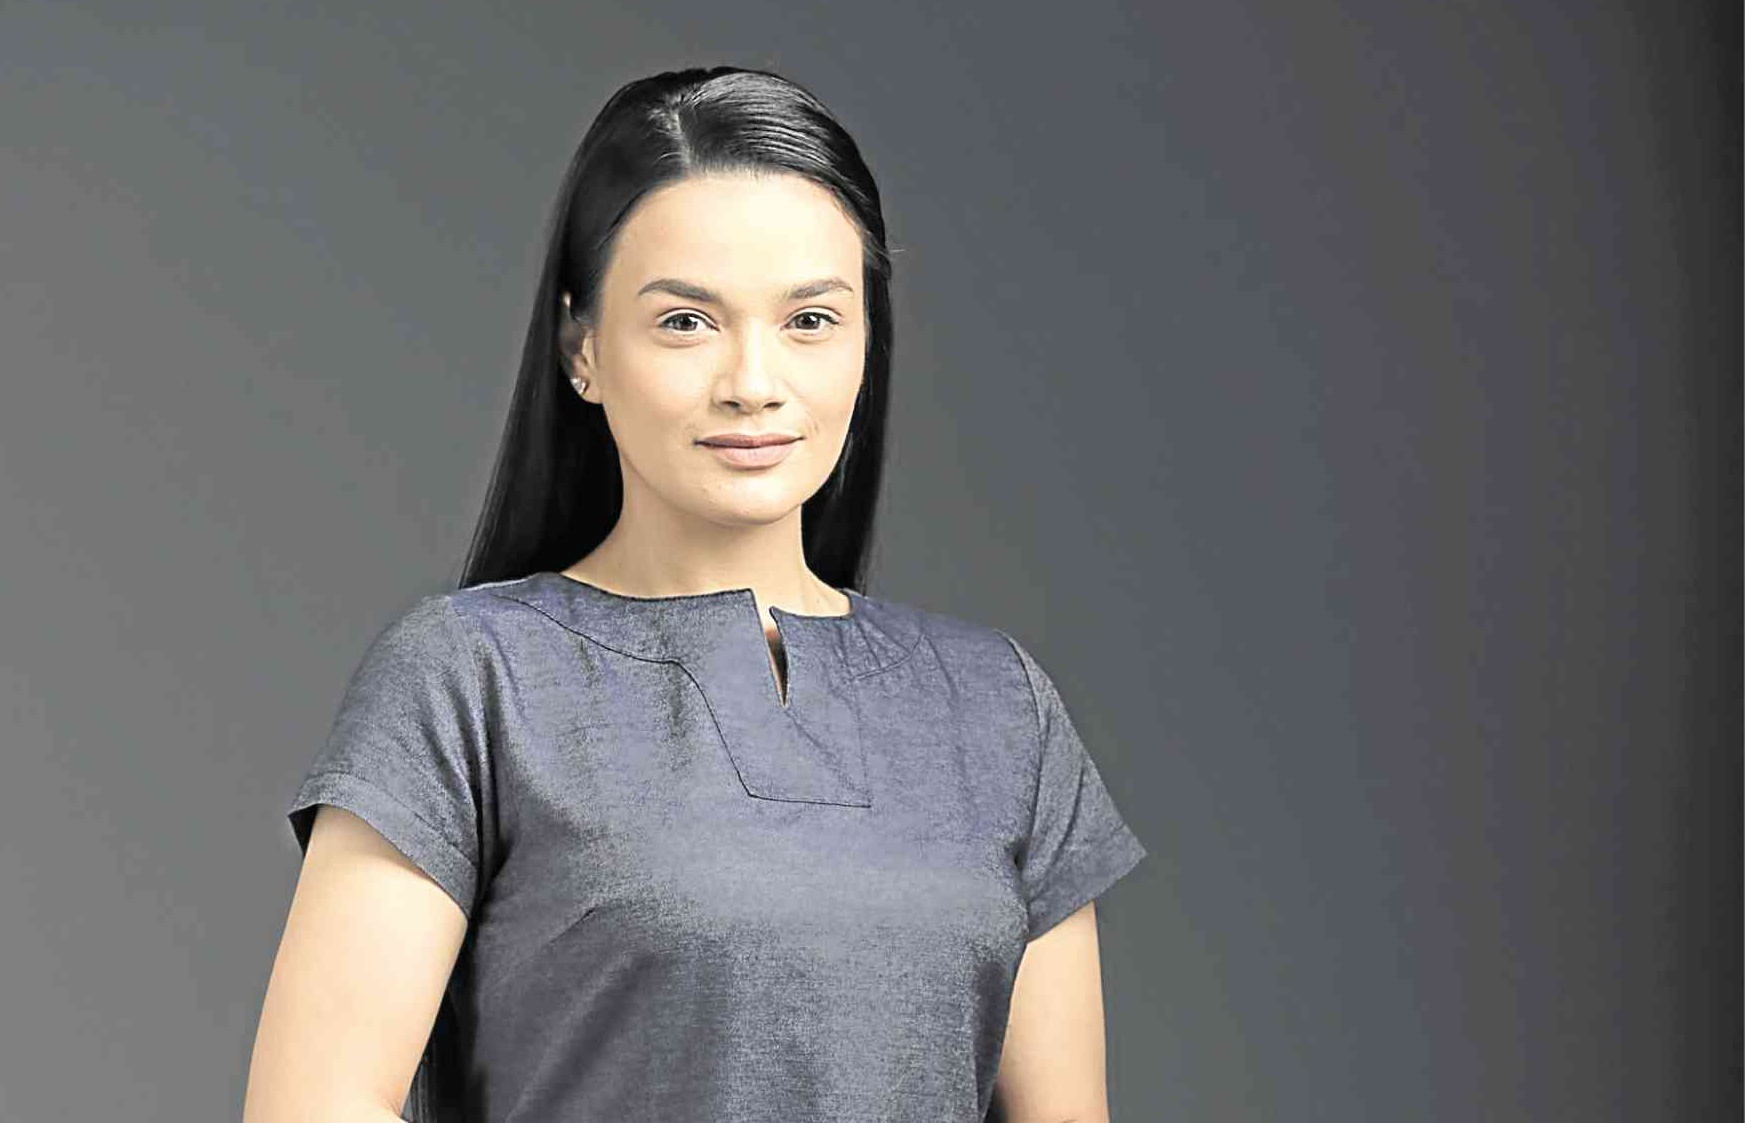 Yasmien Kurdi excited to graduate this April at age 30